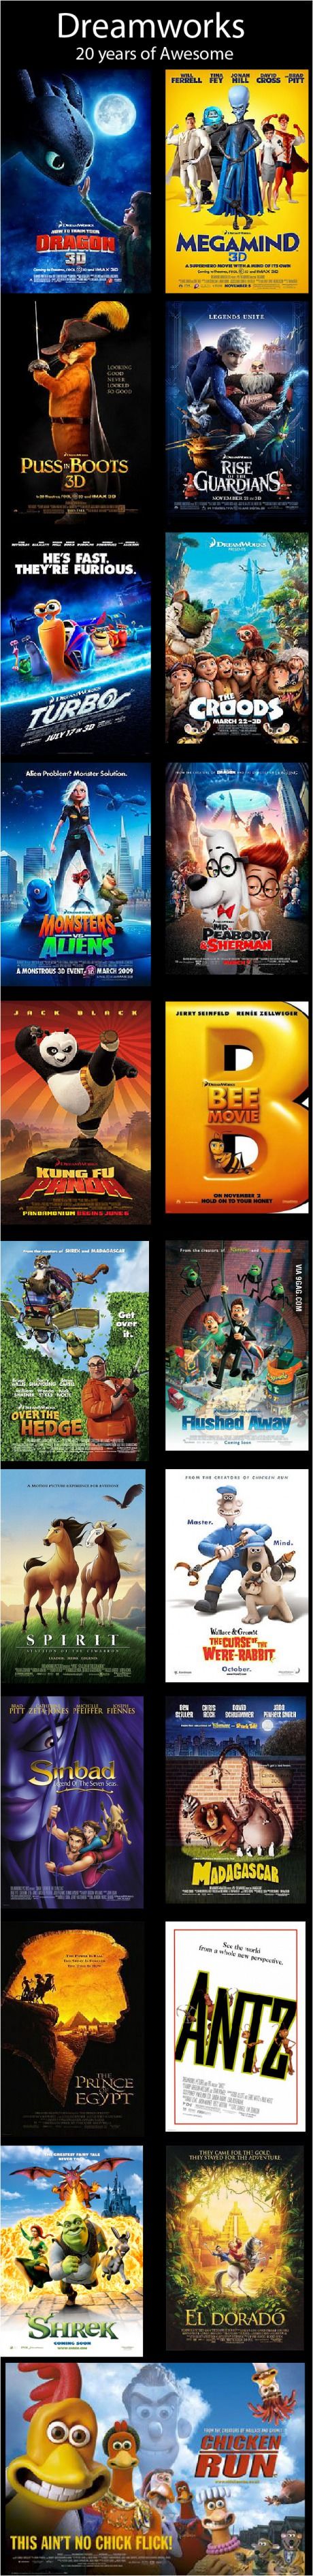 With all the talk of Disney I just wanted to remind people Disney Movie Marathon List, Dreamworks Movies List, Disney Movie Marathon, 2000 Nostalgia, Movie Workouts, Good Animated Movies, Dreamworks Characters, Childhood Memories 2000, Dreamworks Movies